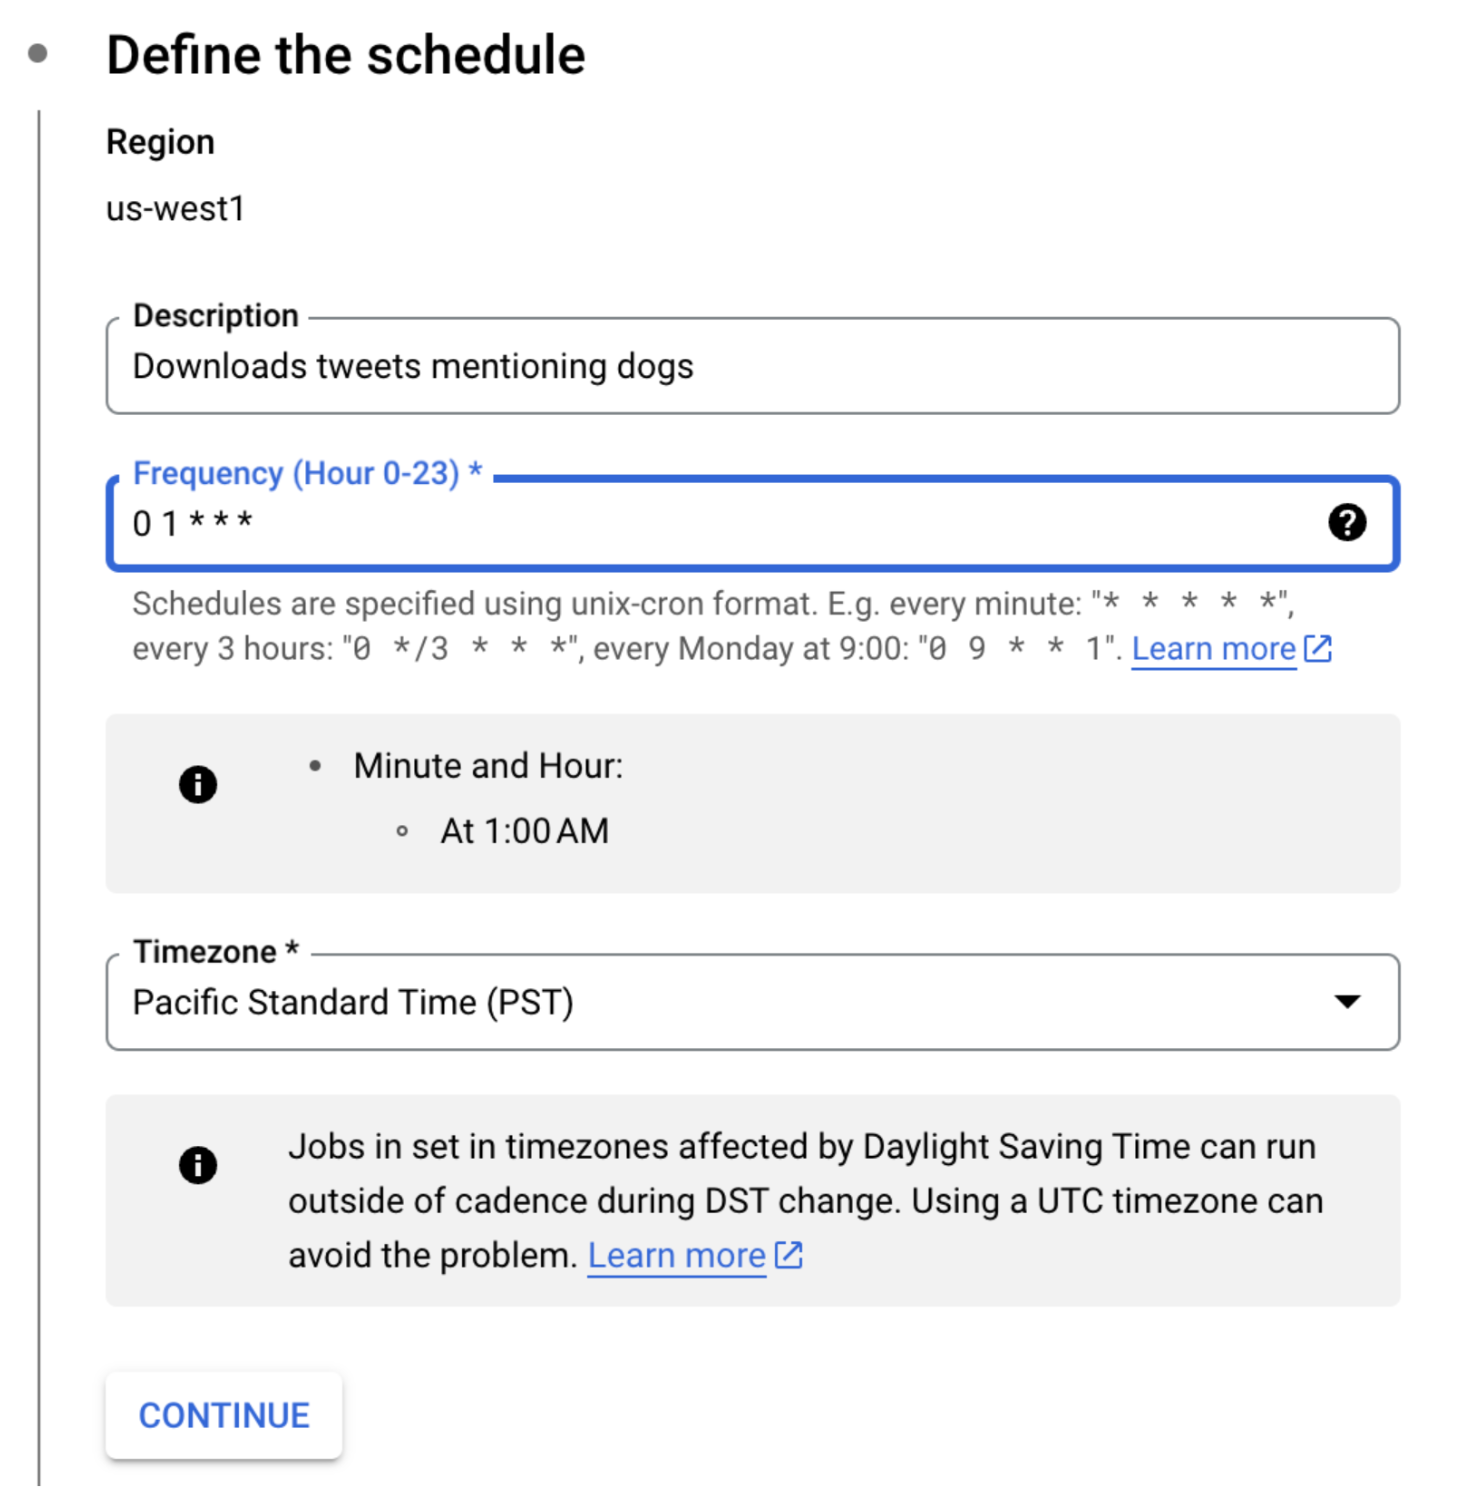 A screenshot of configuring a job with the google cloud scheduler. It has the description "Downloads tweets mentioning dogs" with a schedule "0 1 * * *", which indicates running every day at 1am in cron syntax.